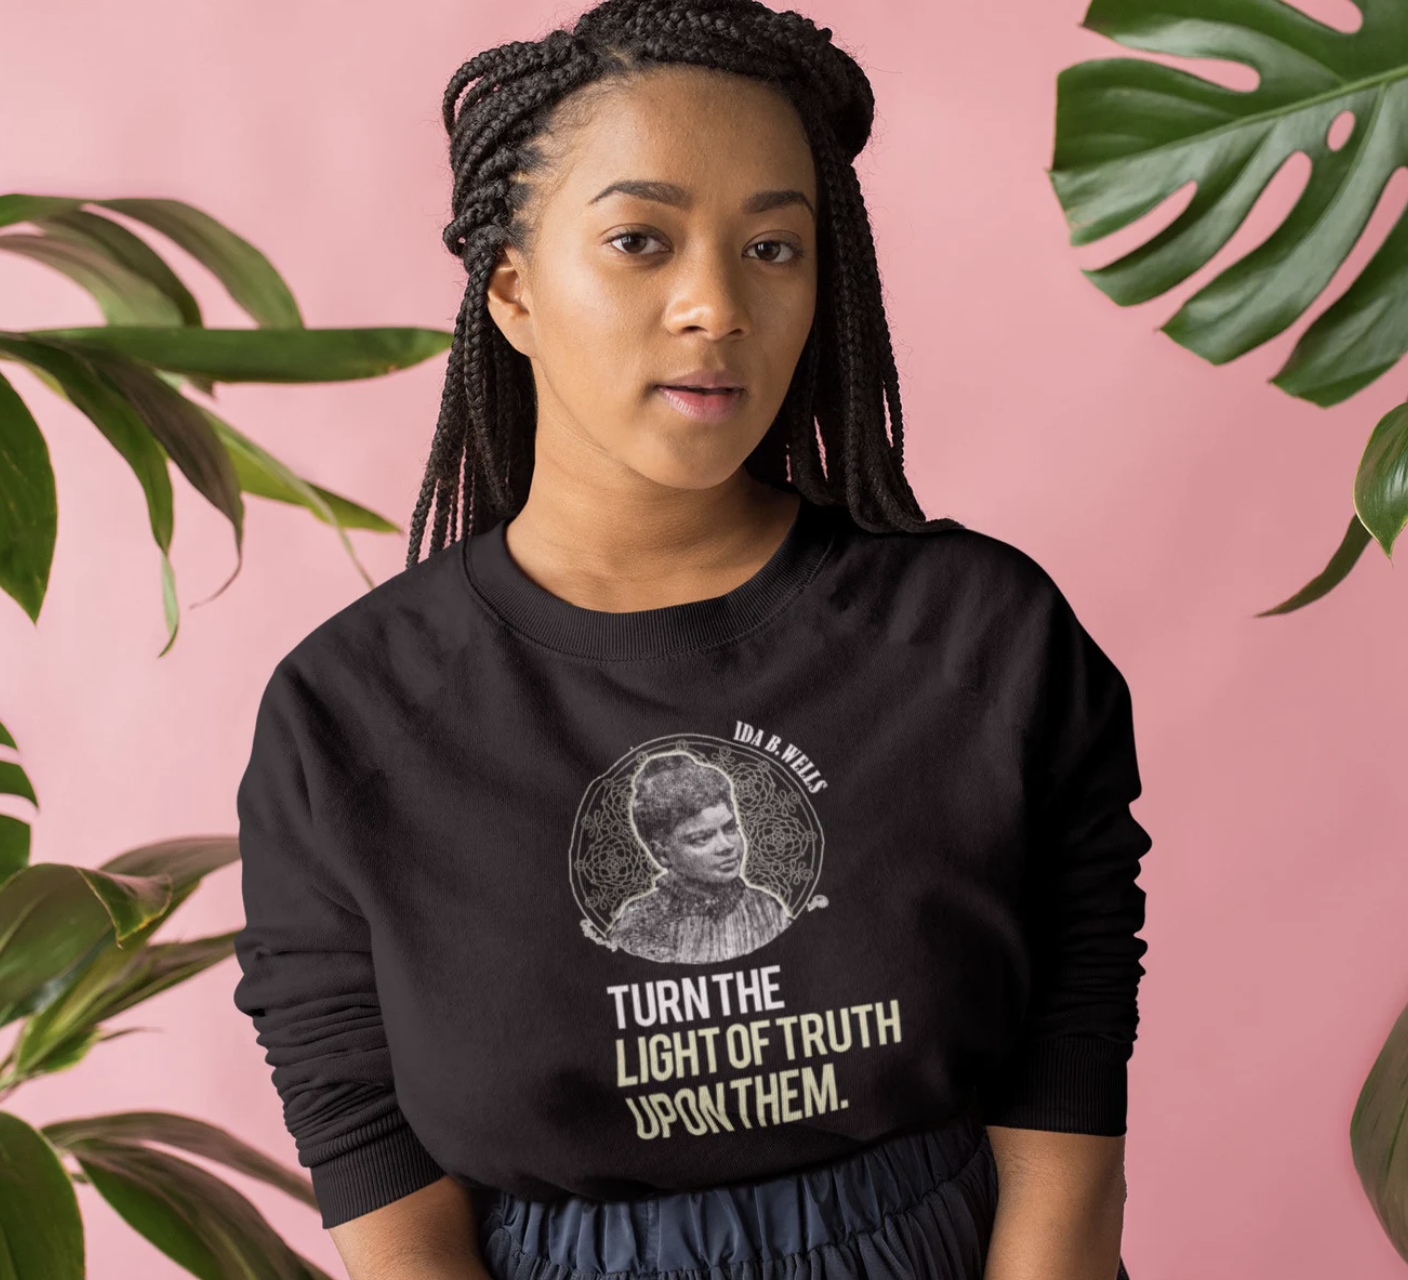 A light brown-skinned Black woman wearing a black sweatshirt with an Ida B Wells quote on it